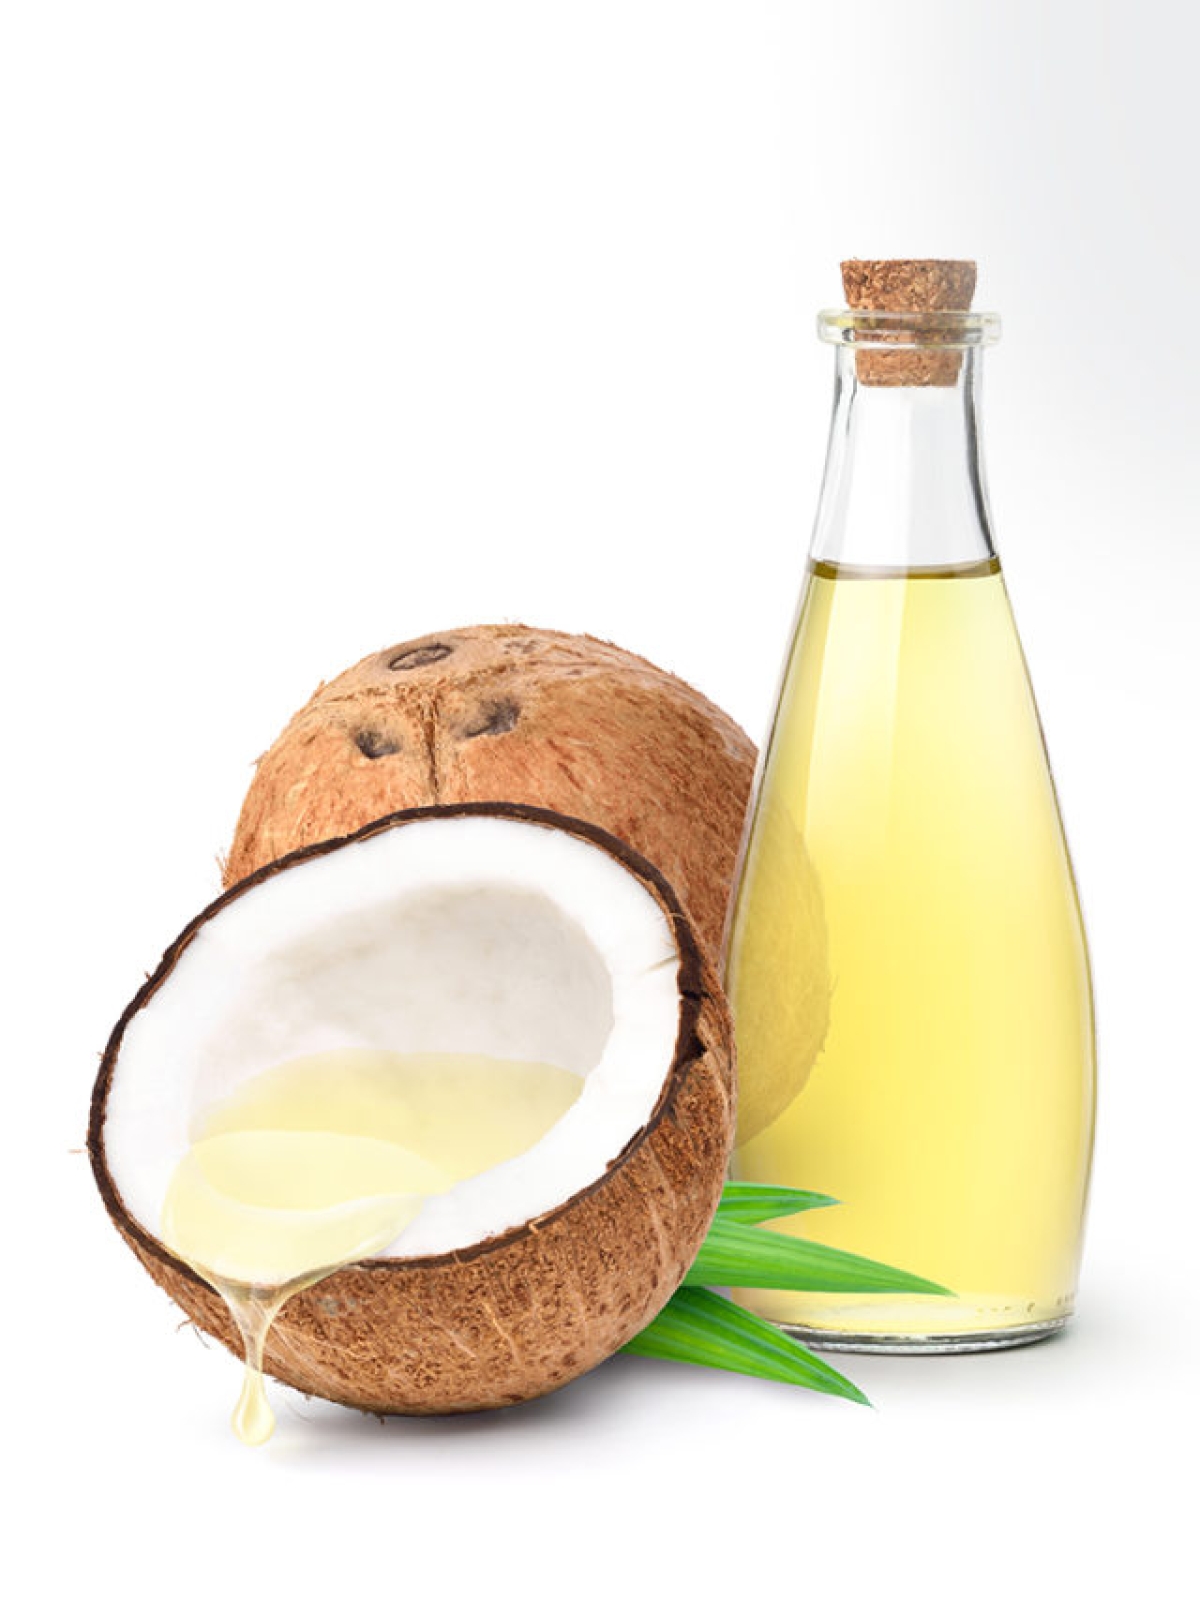 Price of Coconut Oil Expected to Surge